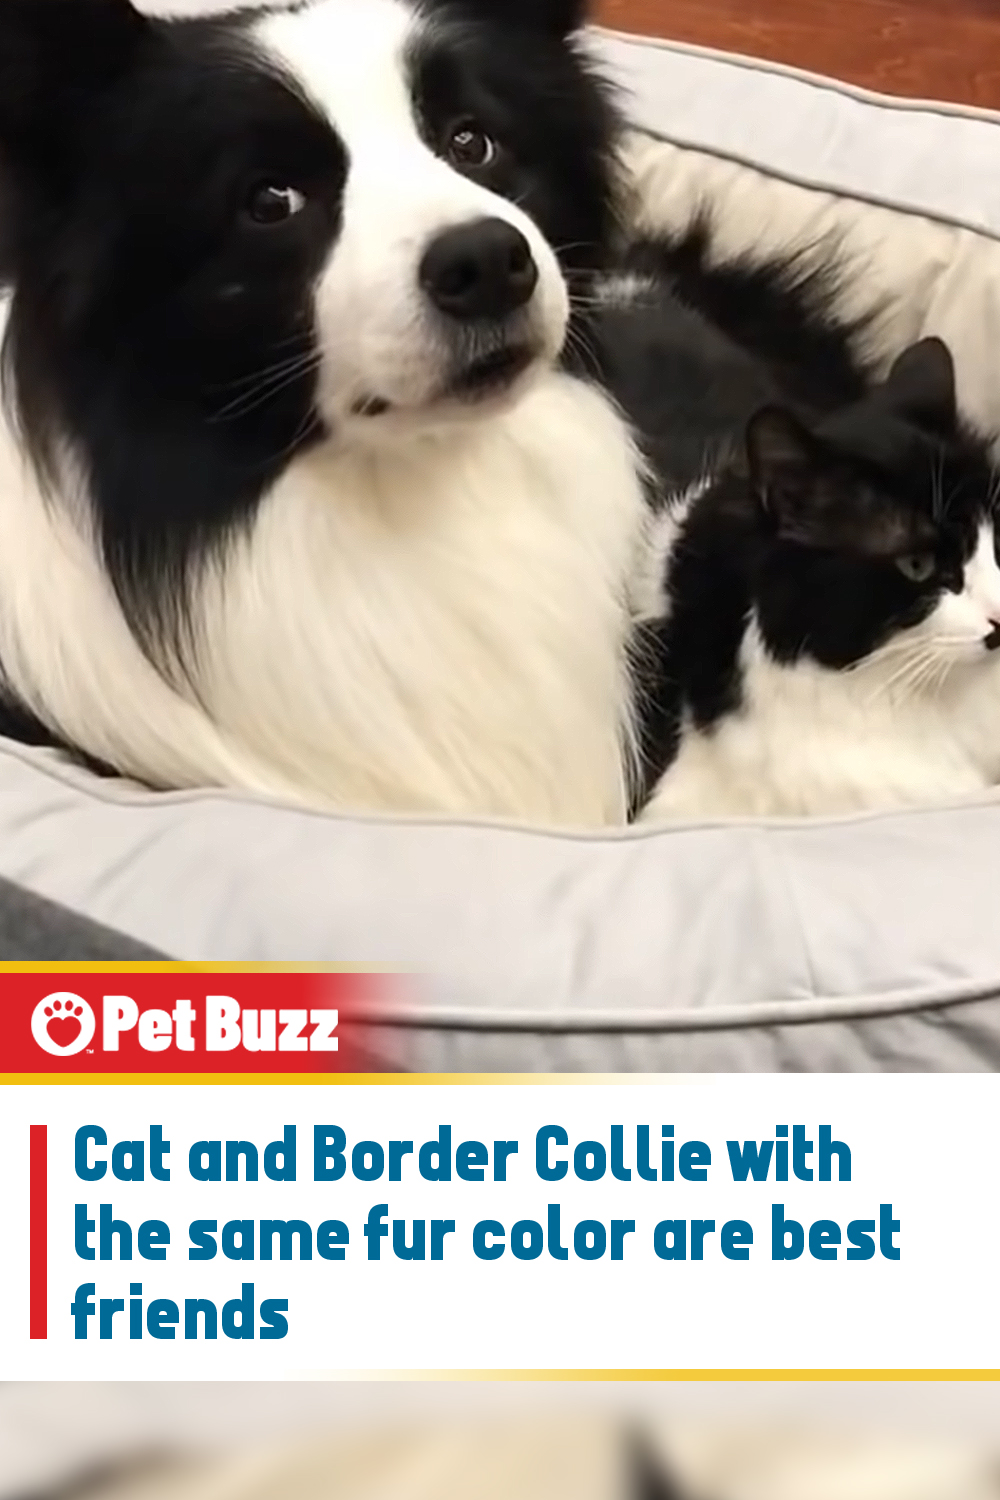 Cat and Border Collie with the same fur color are best friends